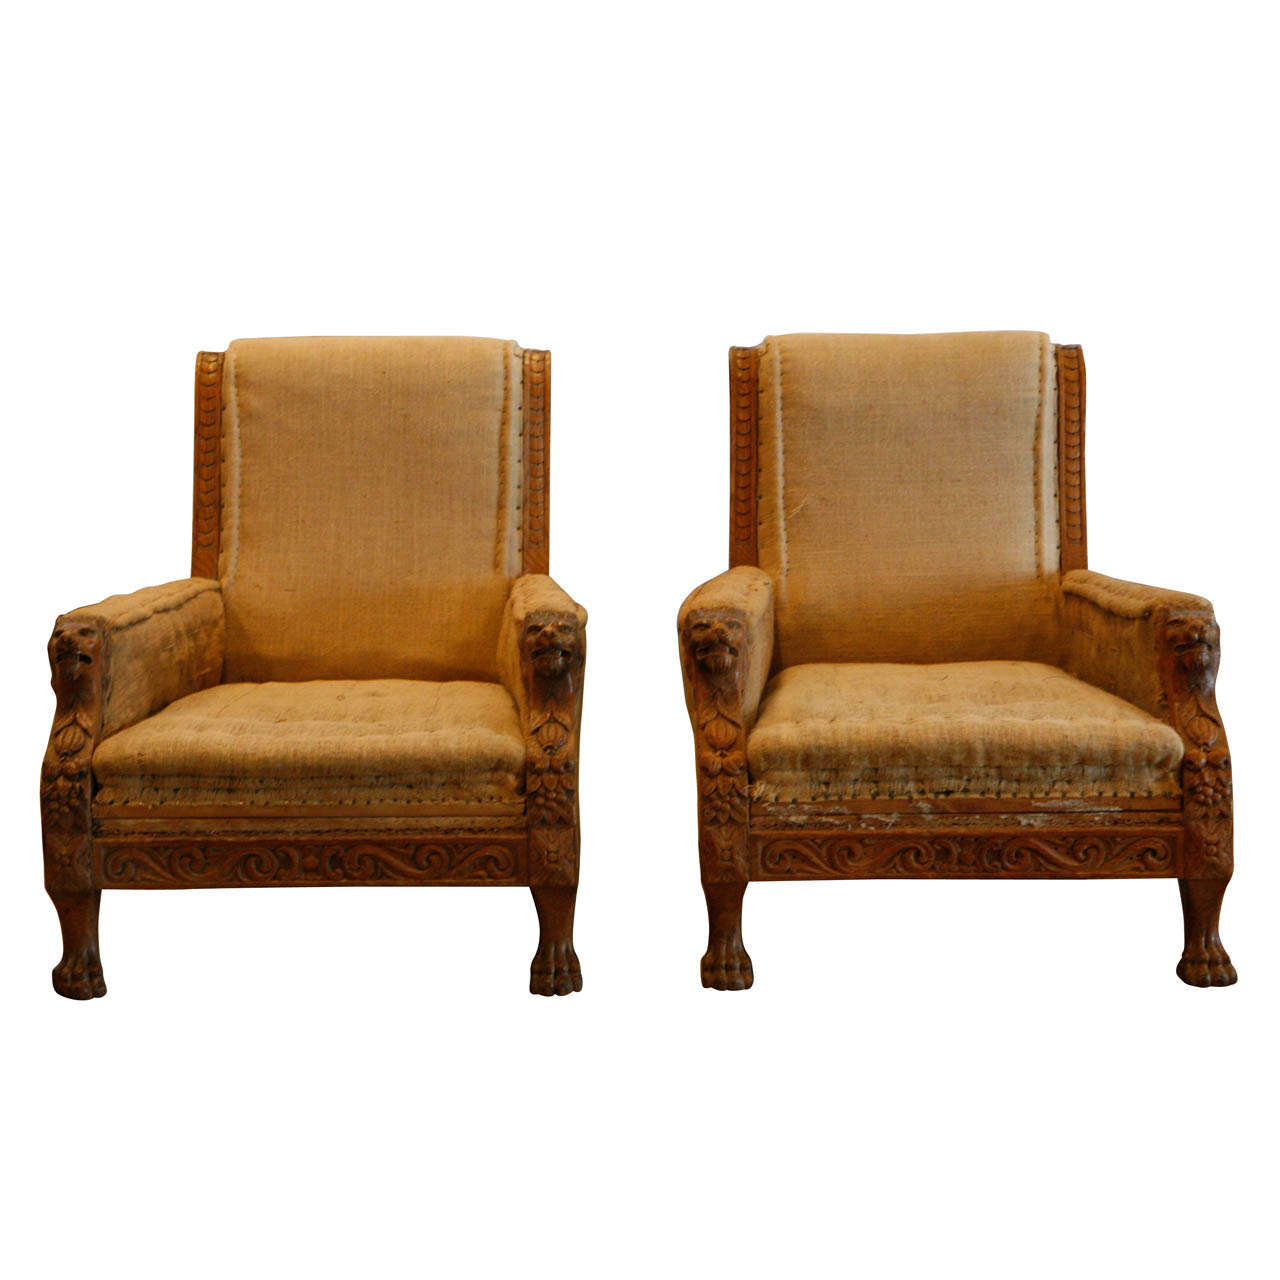 Pair of Exceptional English Library Chairs, Late 19th Century